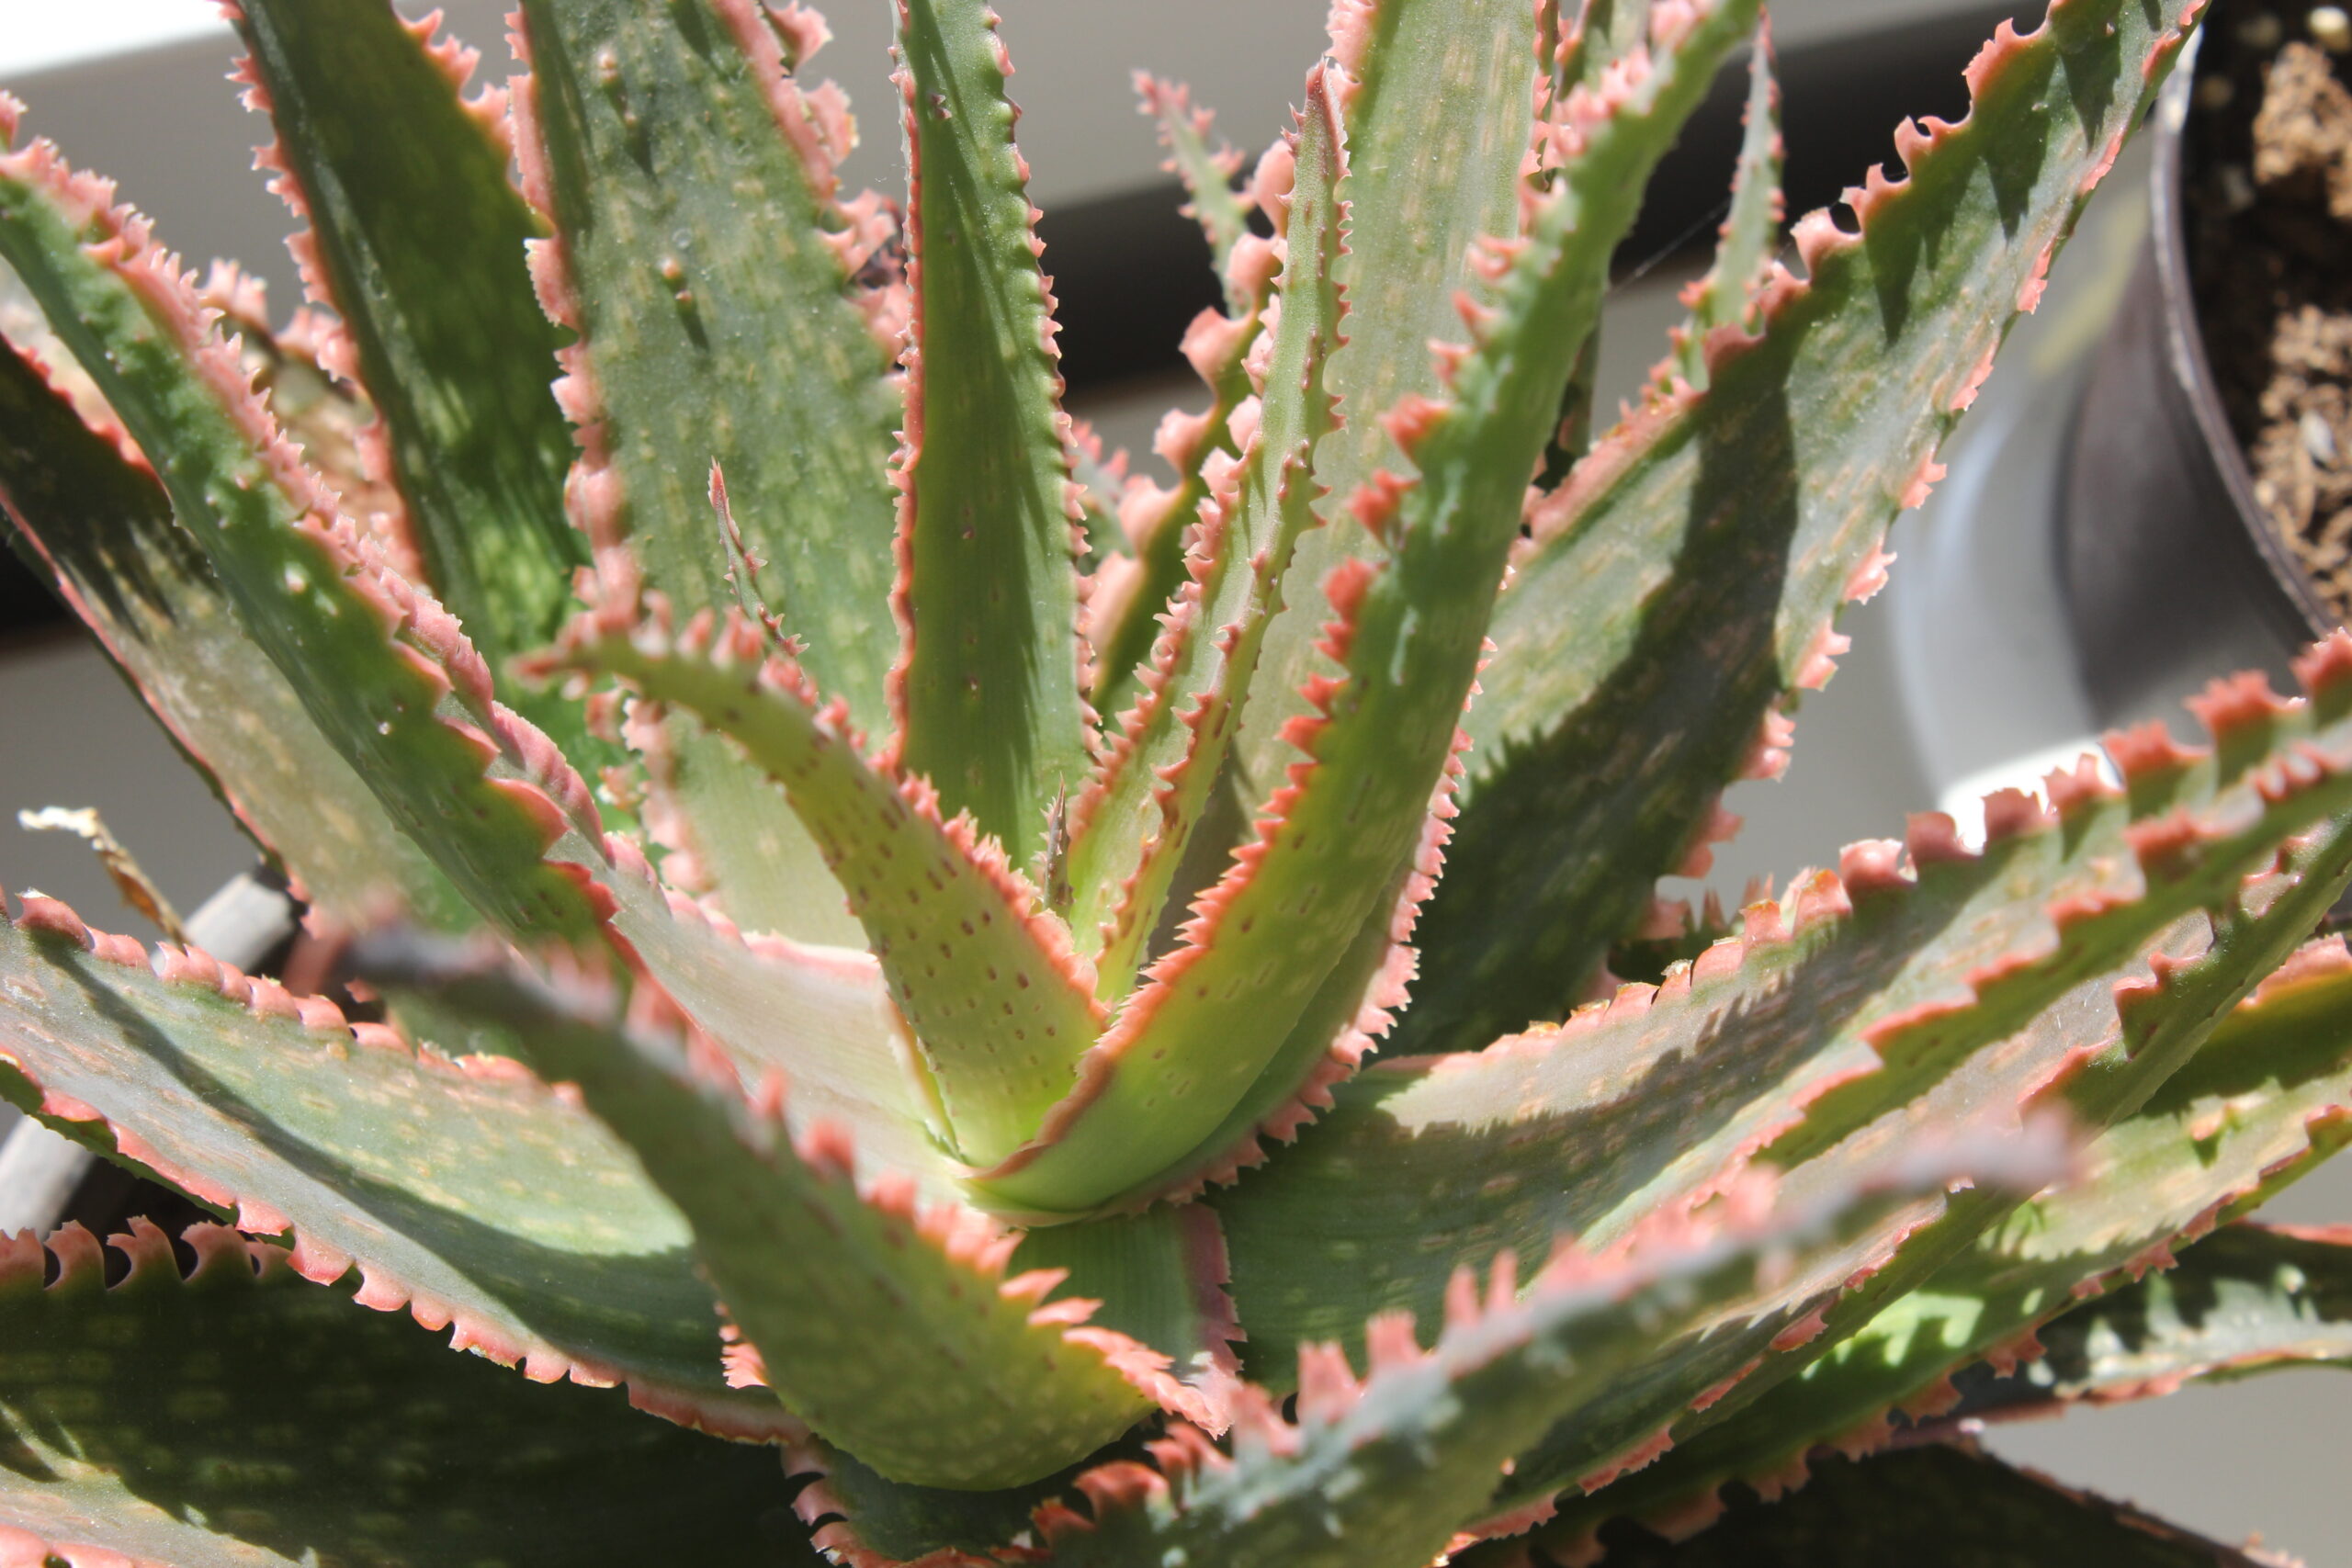 Aloe Buhrii SEEDS,15+ seeds for $3.00 2019 Harvested June FREE SHIPPING 